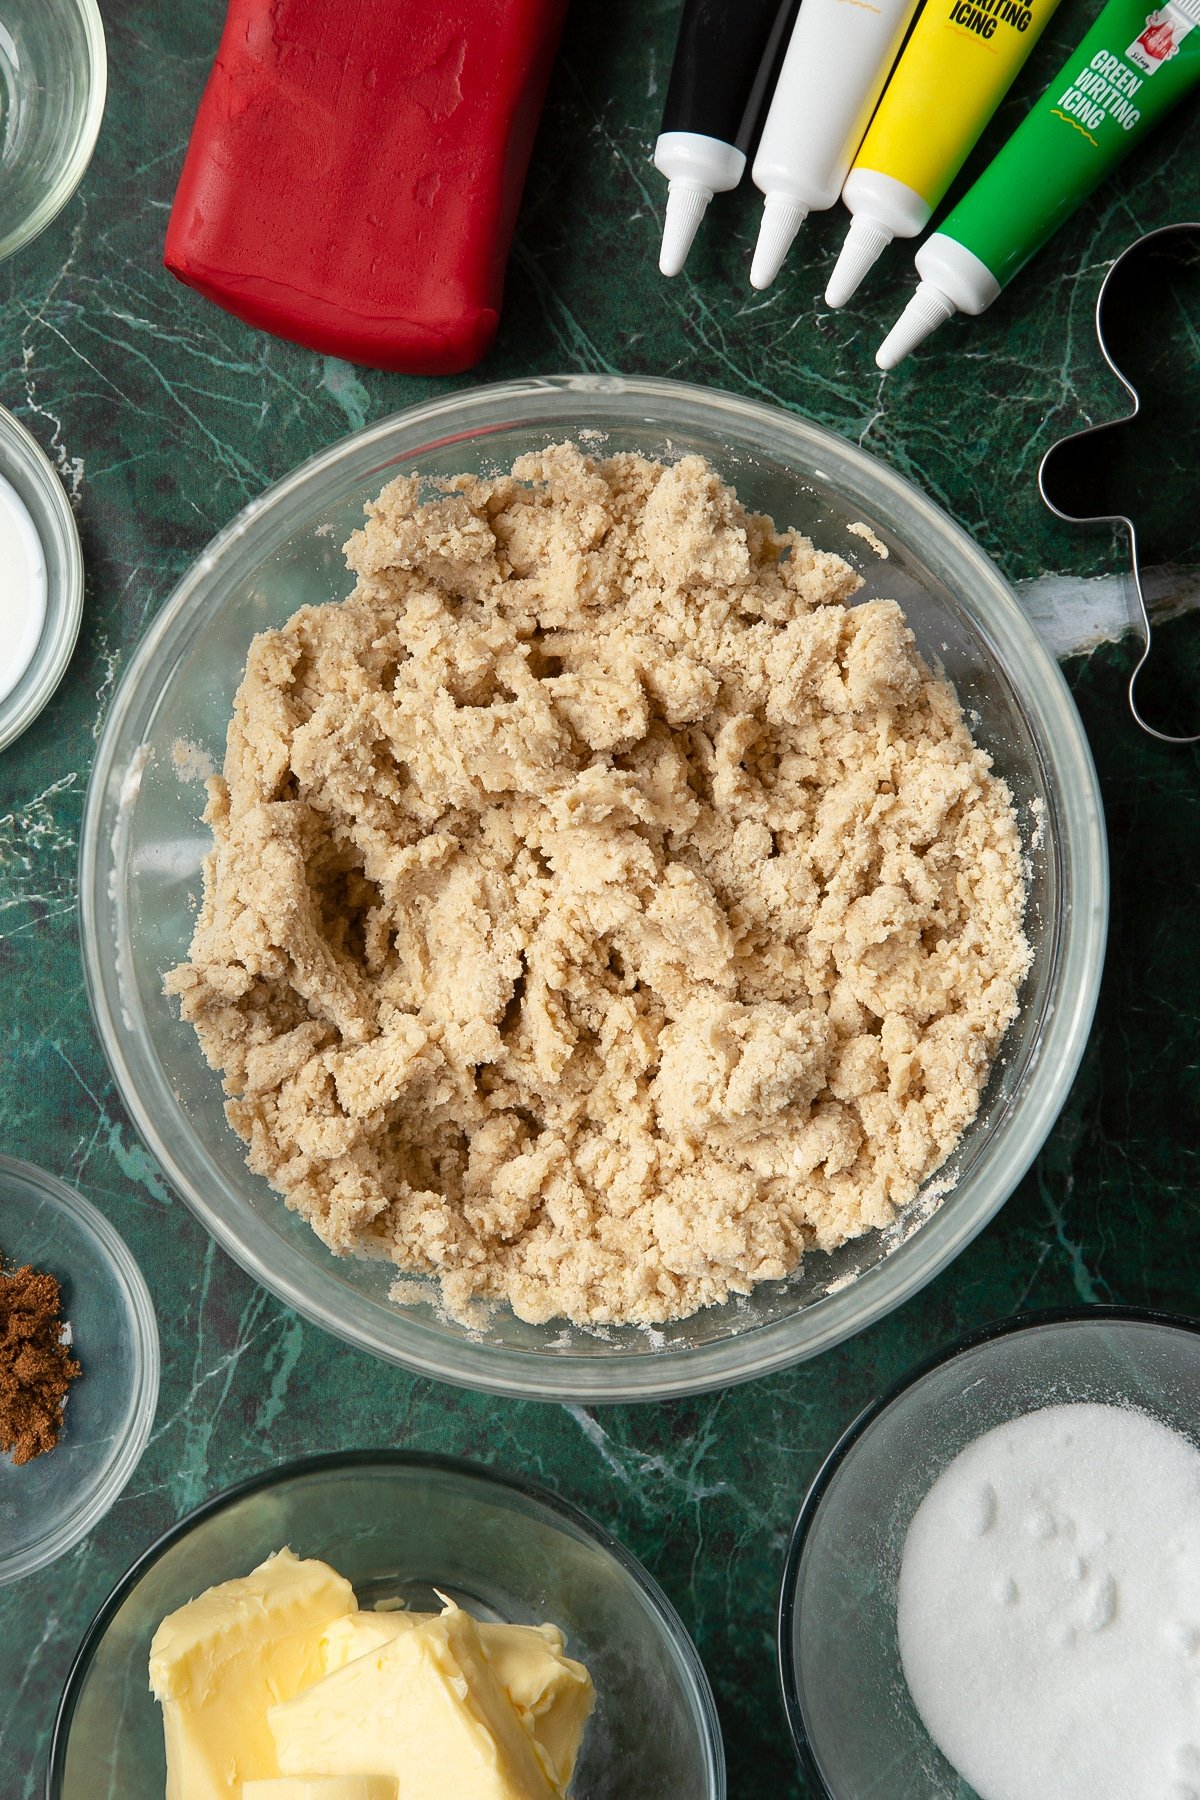 A rough cookie dough in a glass mixing bowl. The bowl is surrounded by ingredients to make Father Christmas cookies.